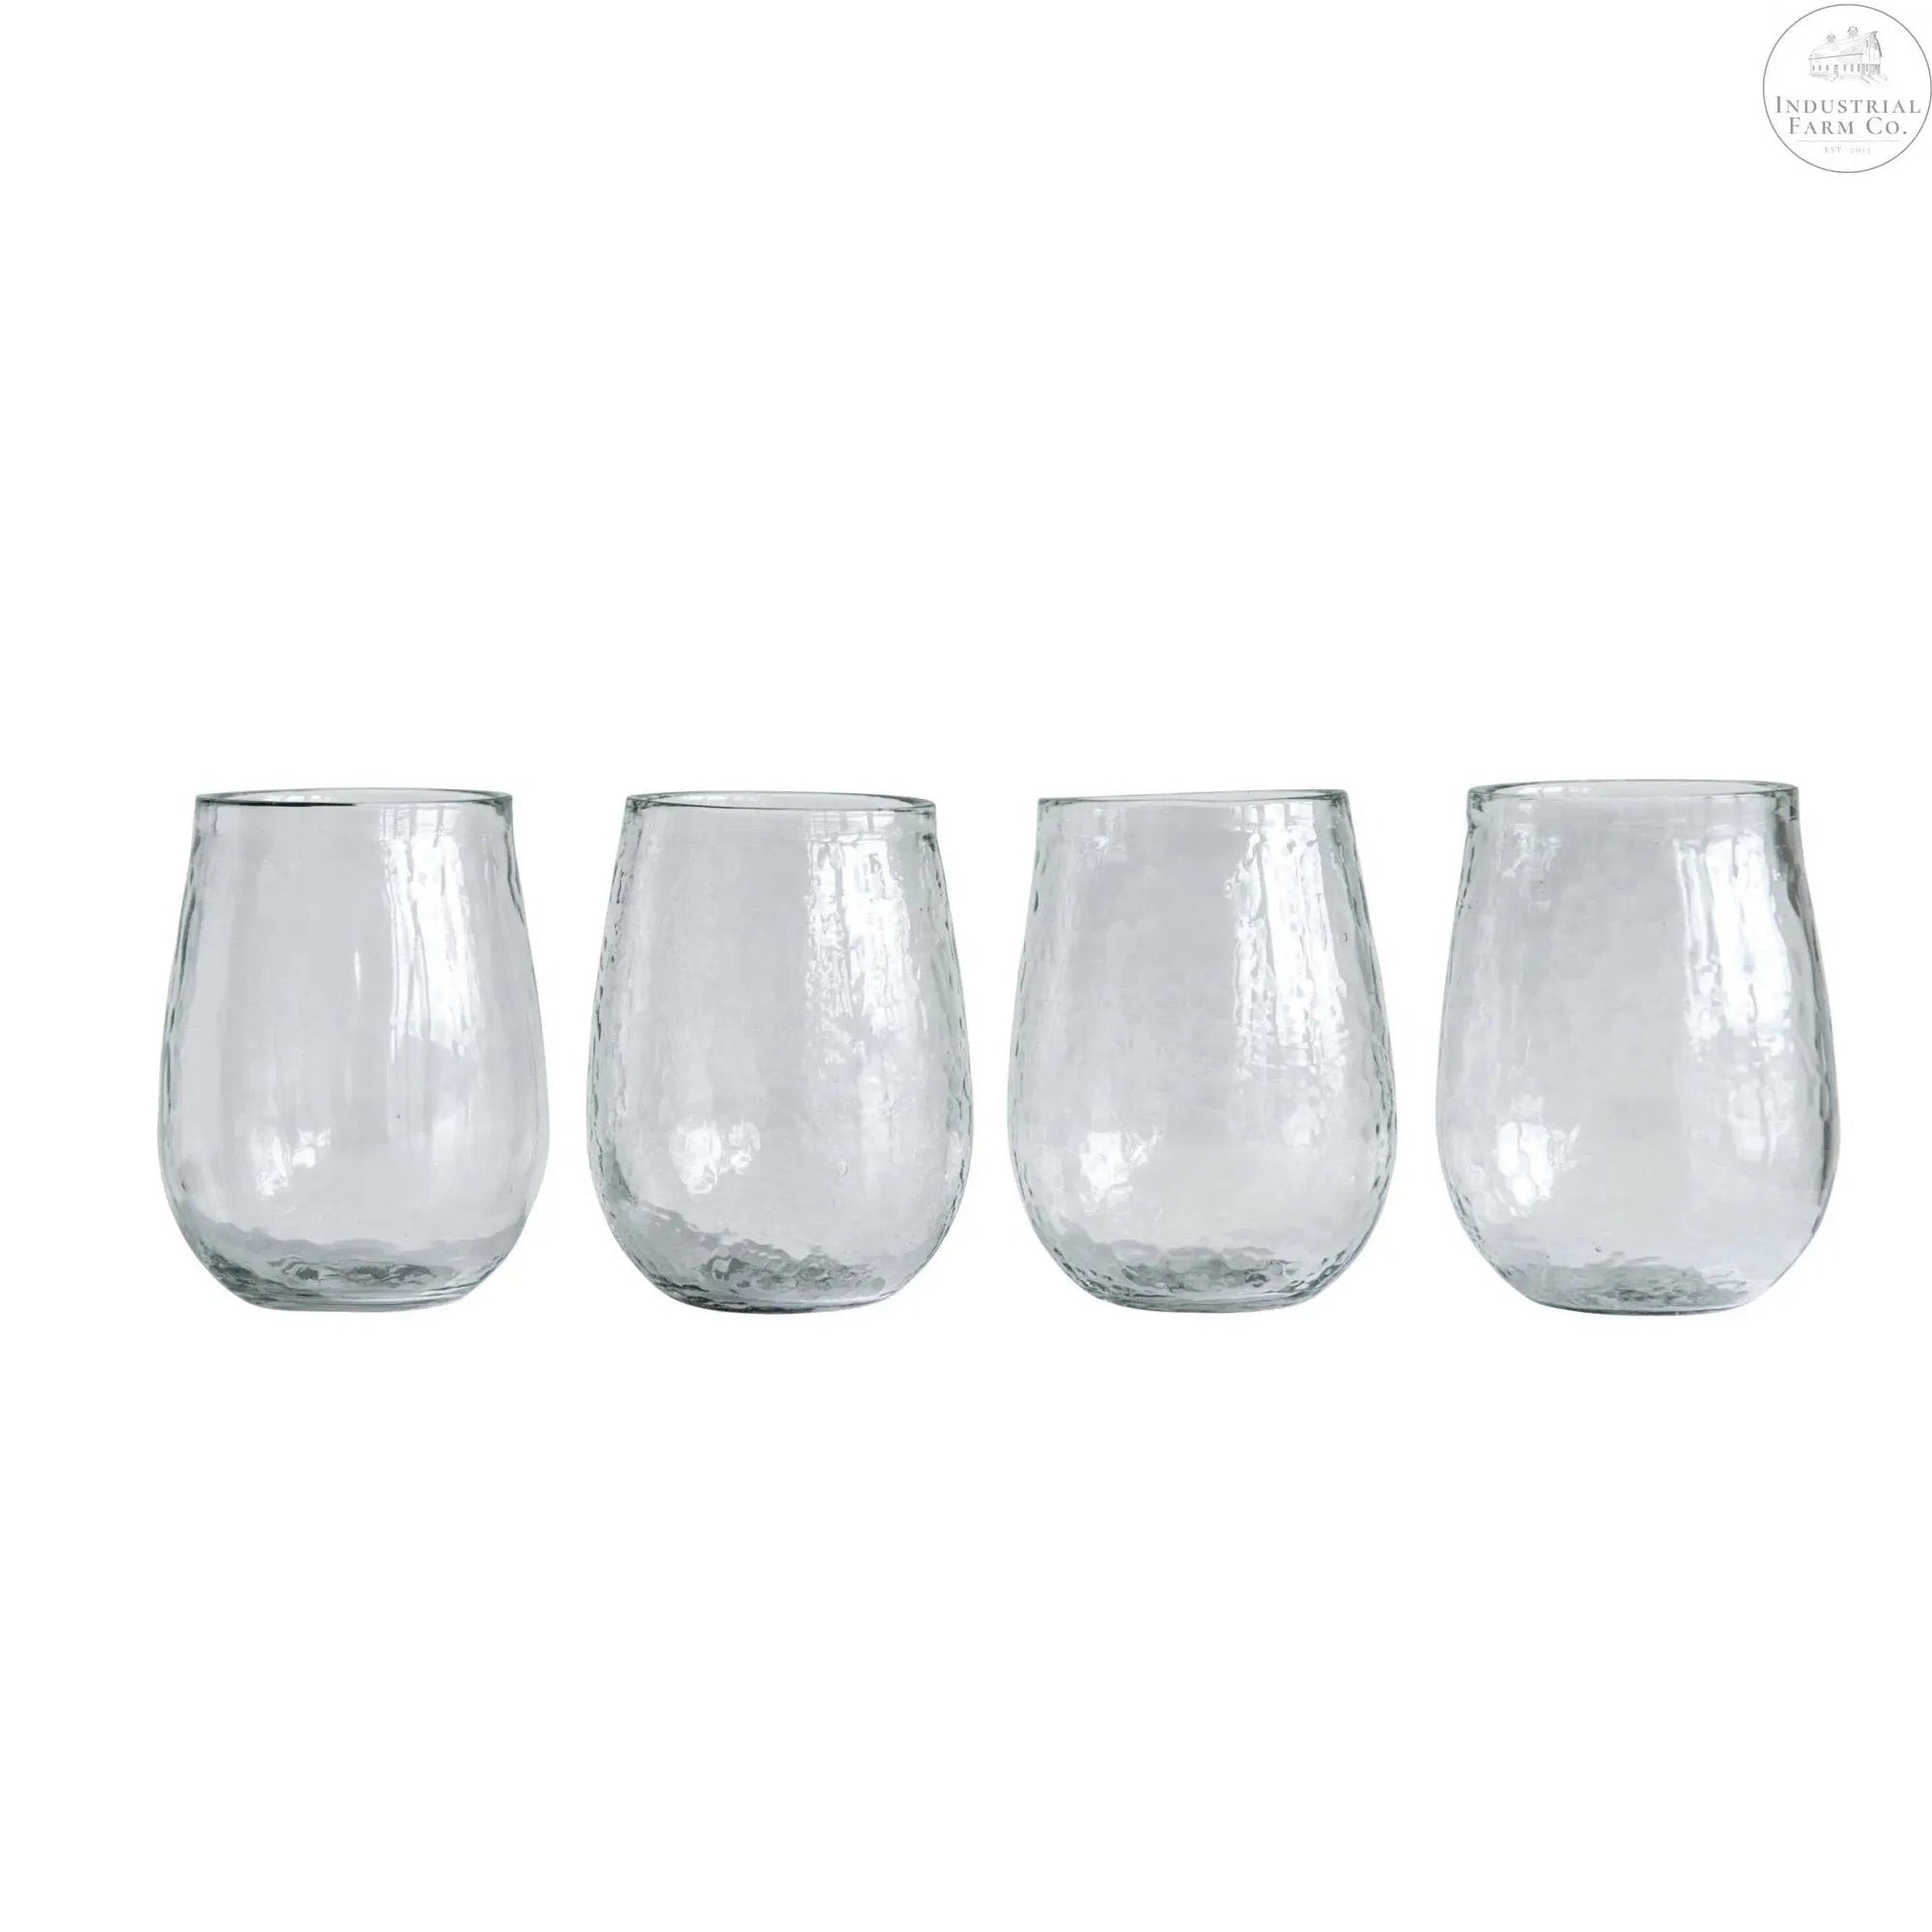 Hammered Wine Glass Set     | Industrial Farm Co